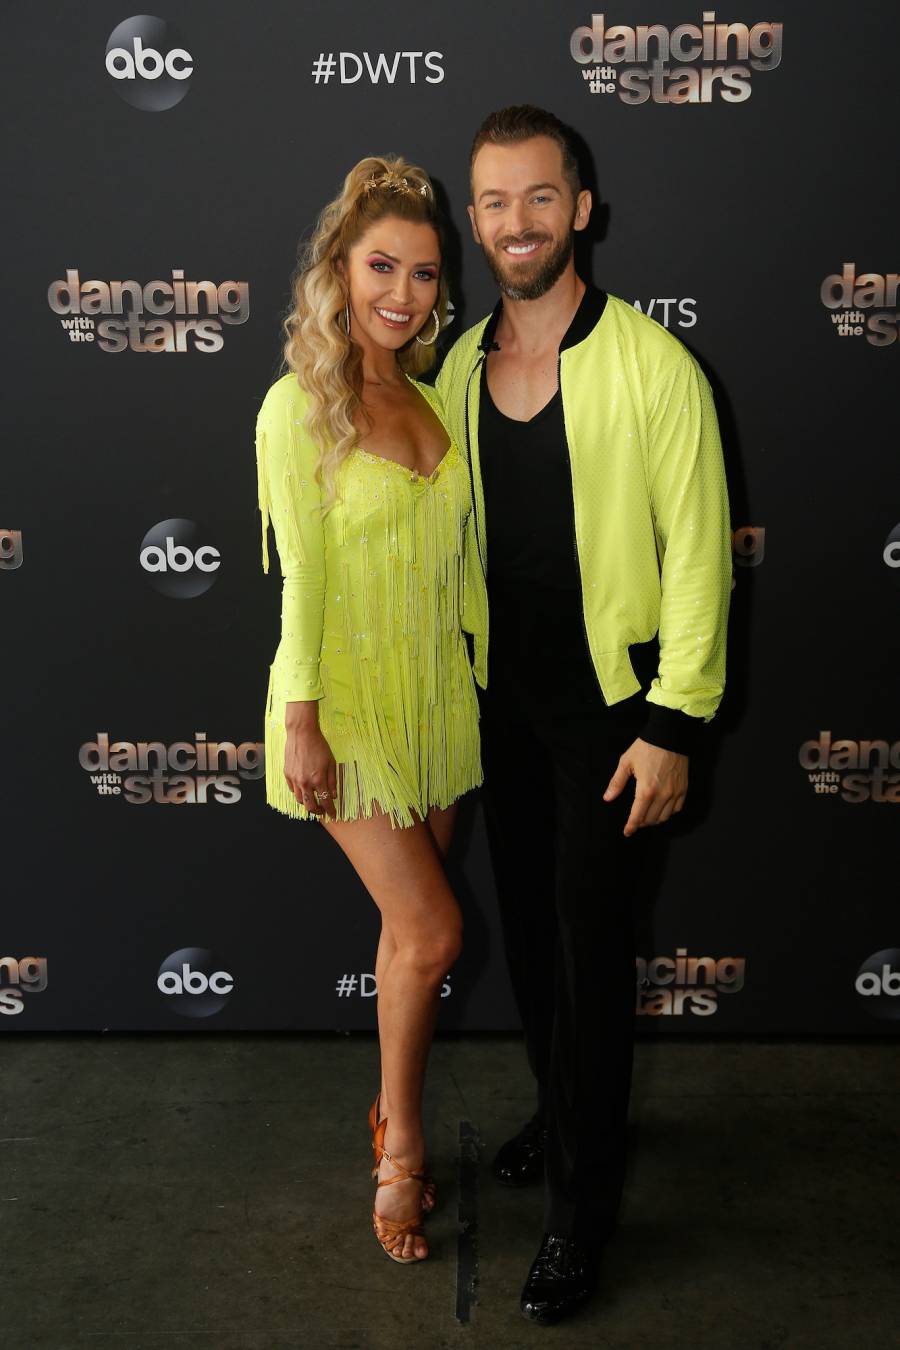 Dancing With the Stars Eliminates First Celeb Kaitlyn Bristowe Artem Chigvintsev